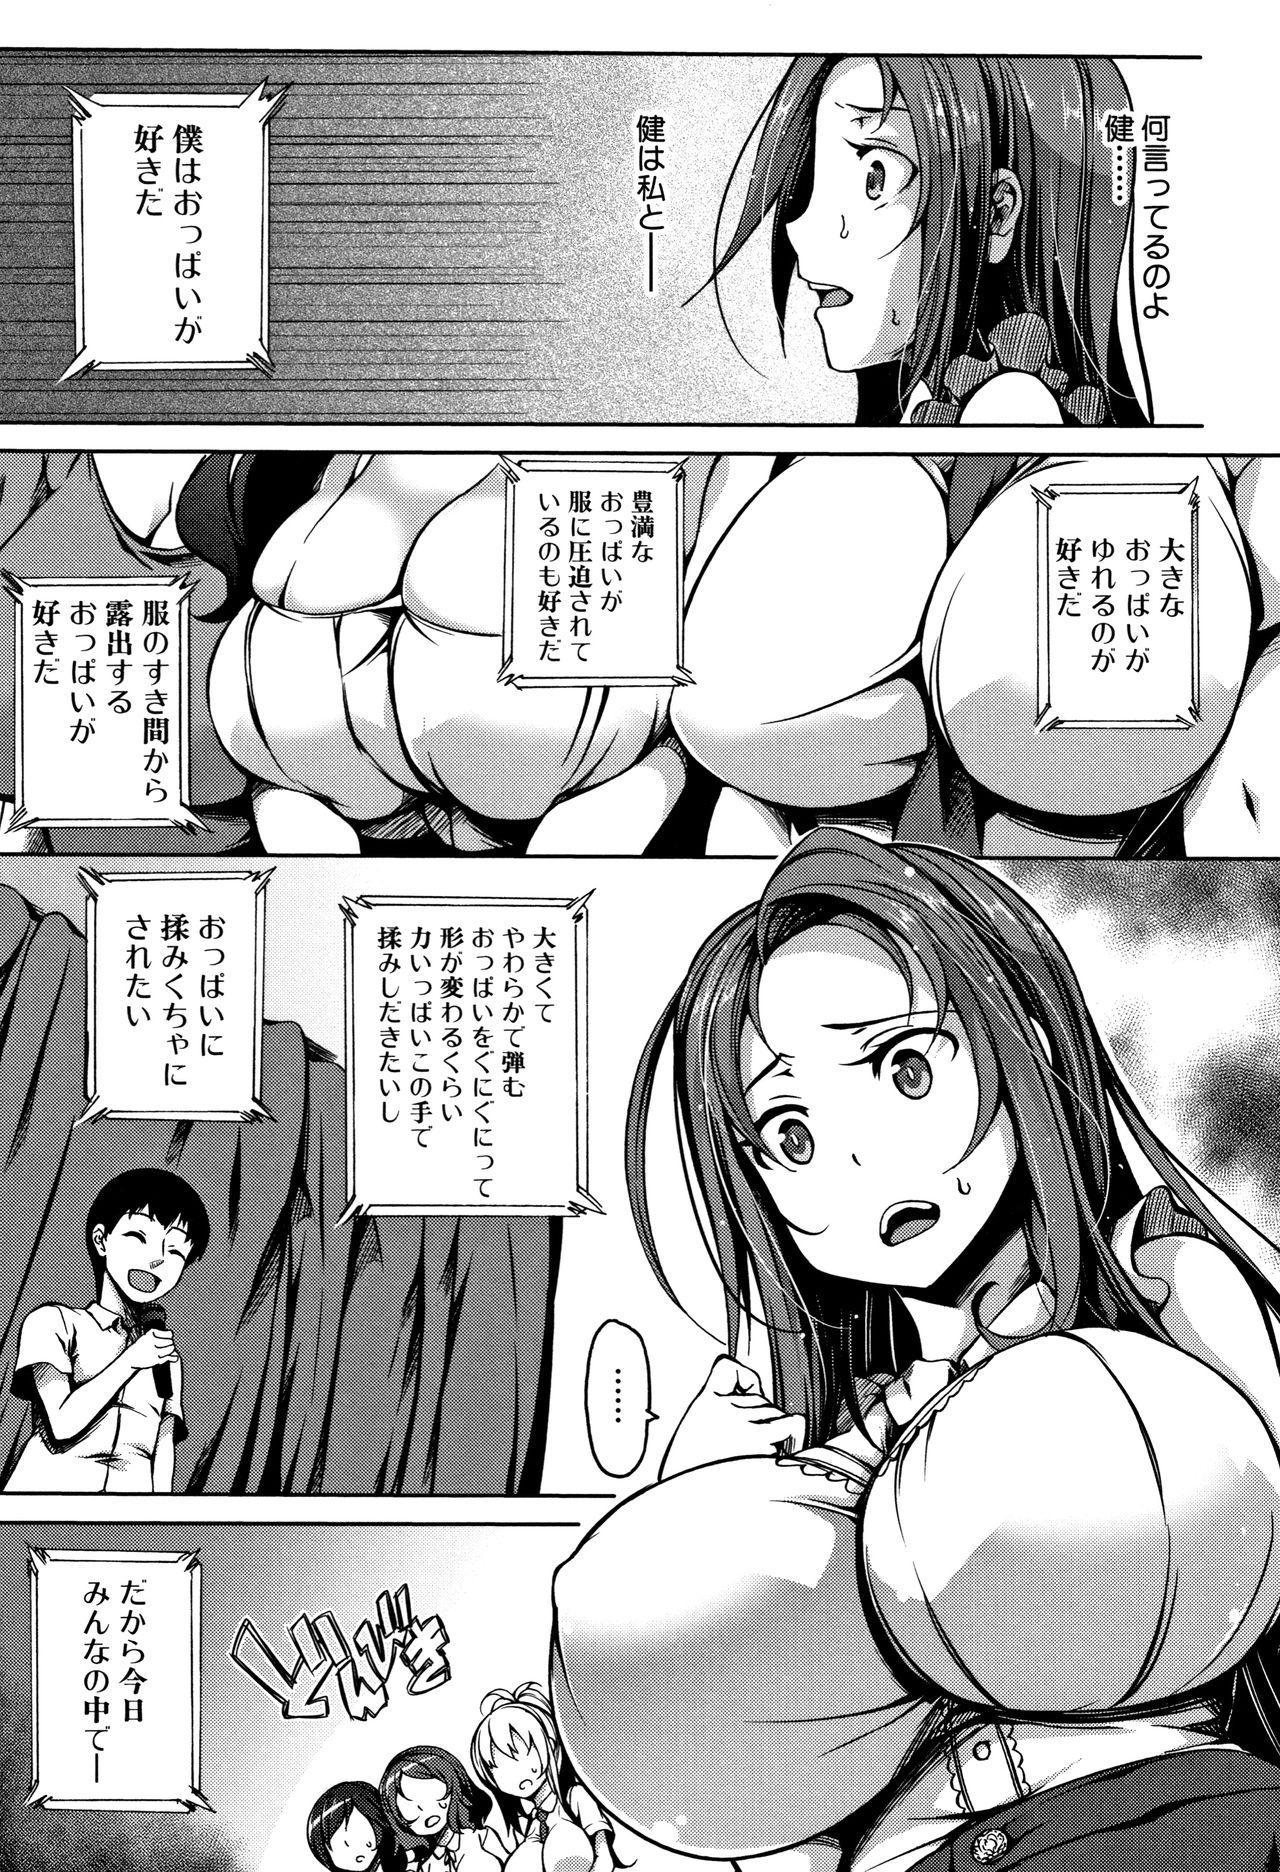 Blacksonboys PAIDOLM@STER! Rough - Page 10